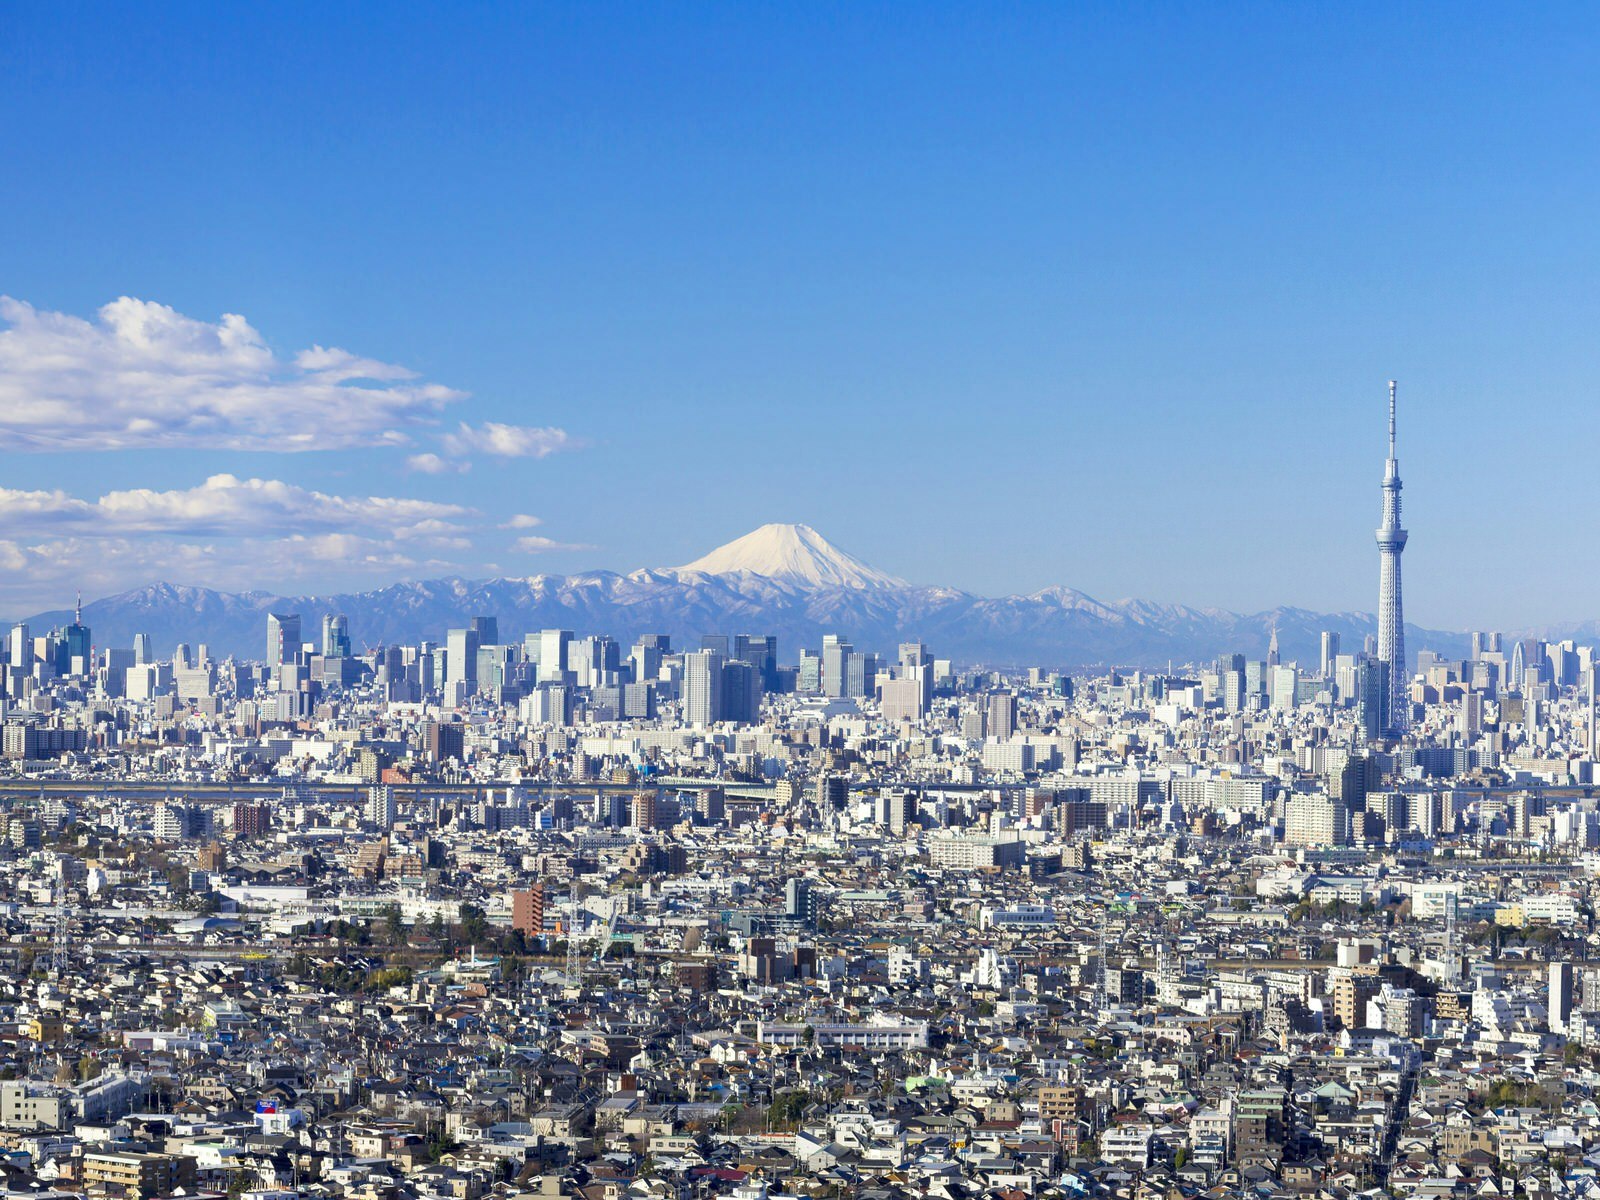 View looking over the city of Tokyo with snow-capped Mt Fuji in the background